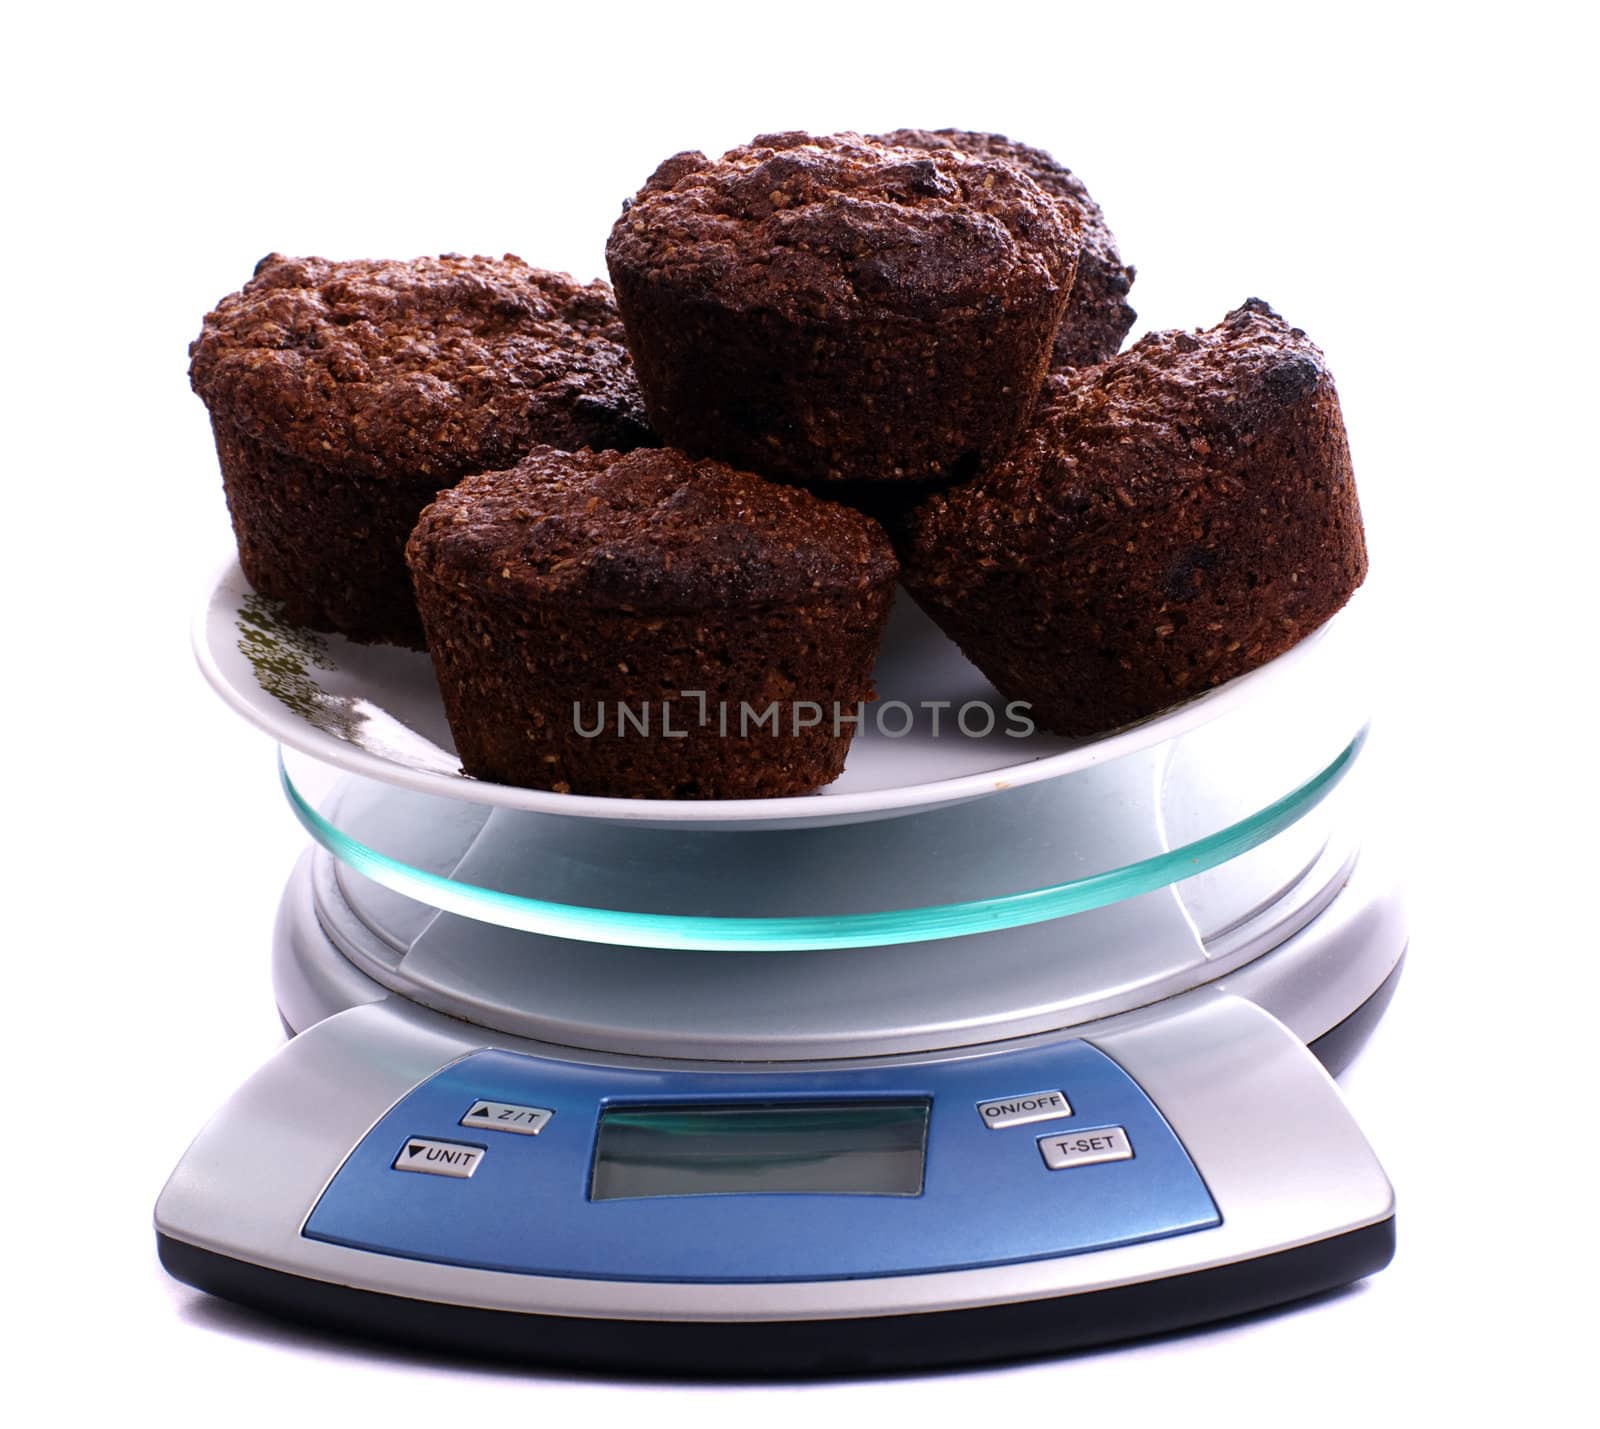 A plate of bran muffins on a small scale, isolated against a white background